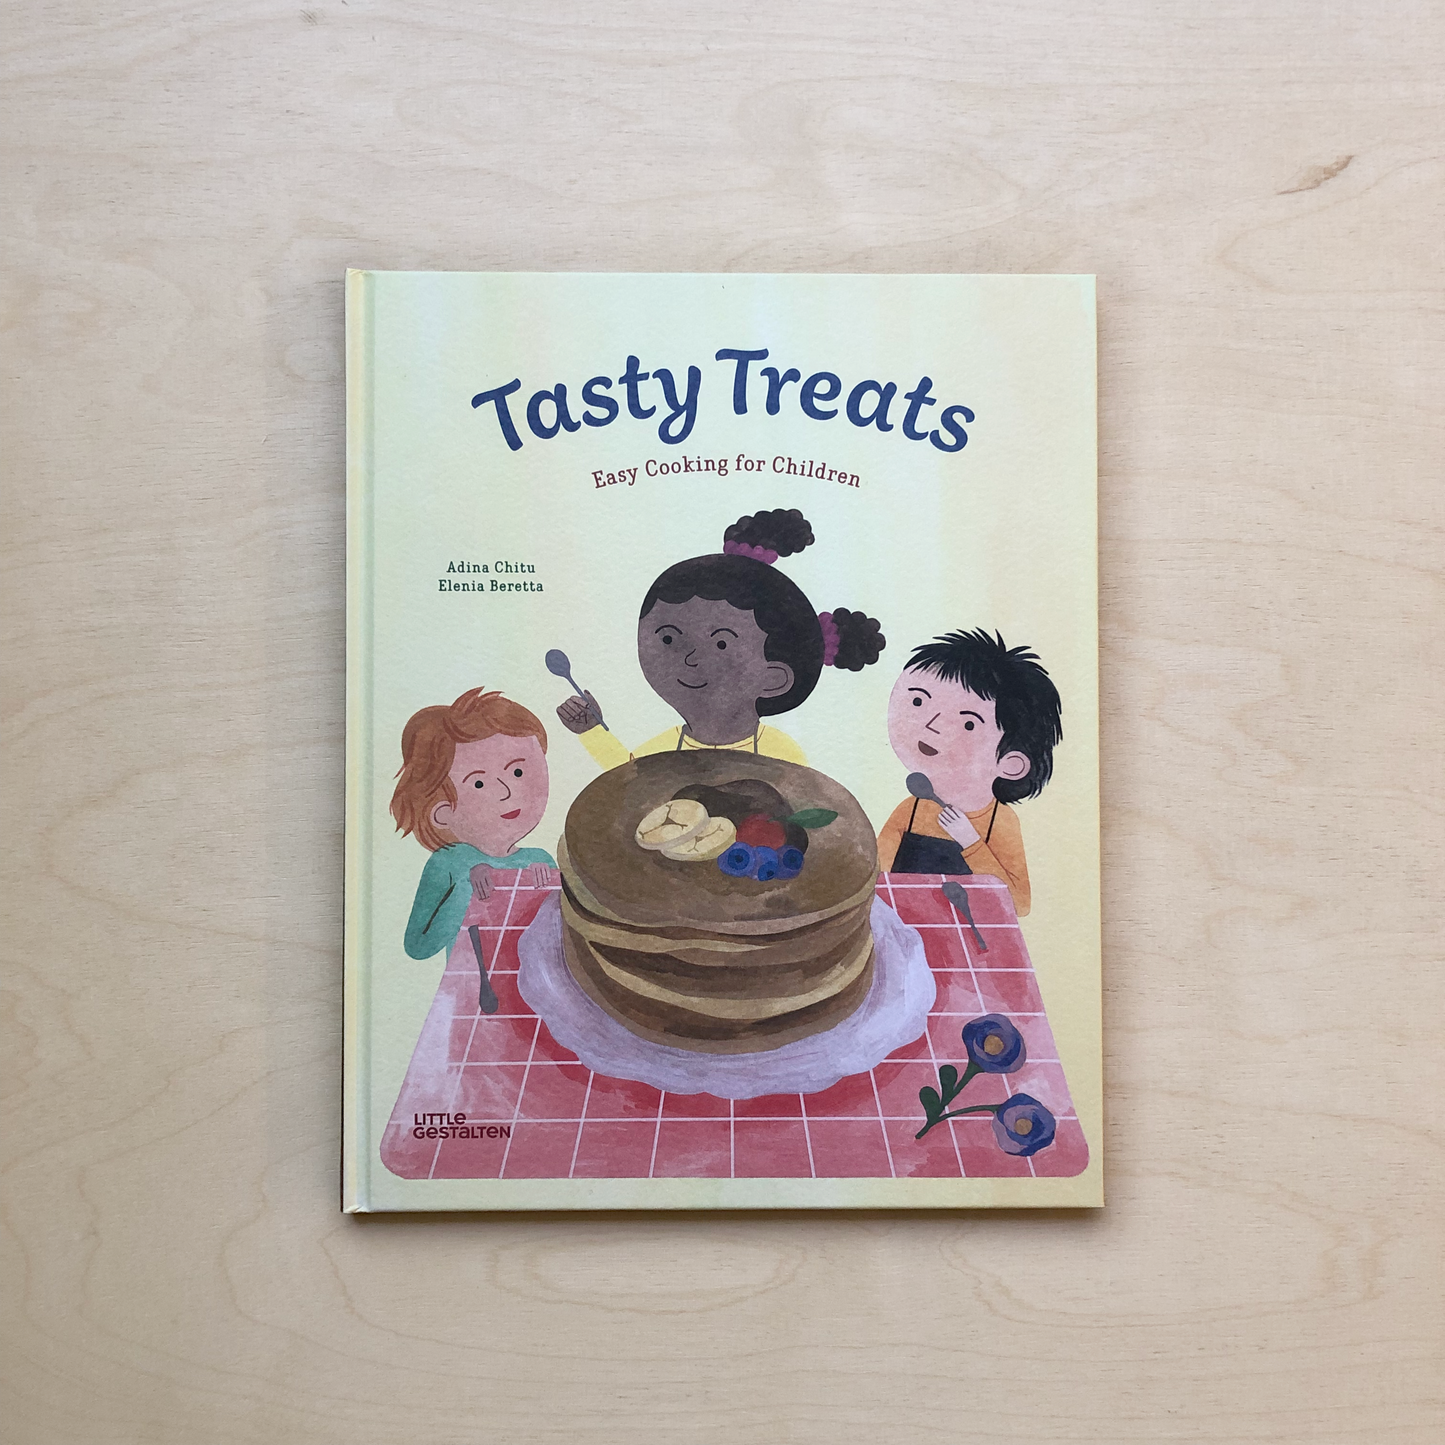 Tasty Treats - Easy Cooking for Children